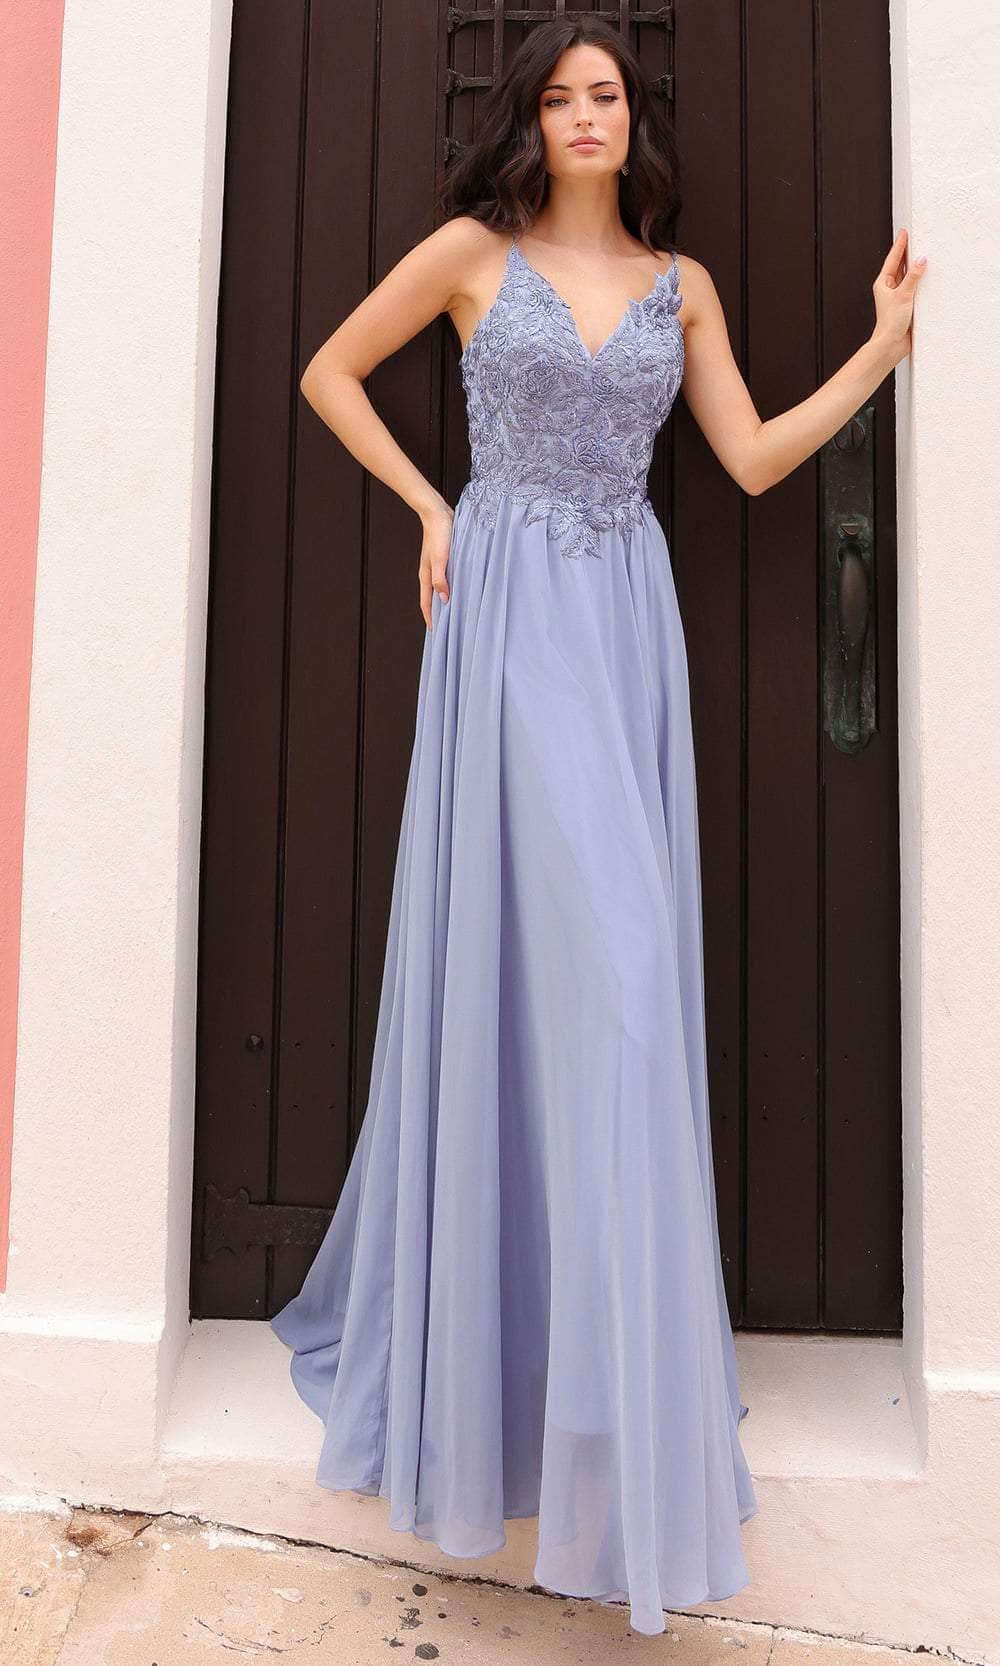 Nox Anabel C1462 - Spaghetti Strap A-Line Prom Dress Special Occasion Dress 4 / Dusty Blue